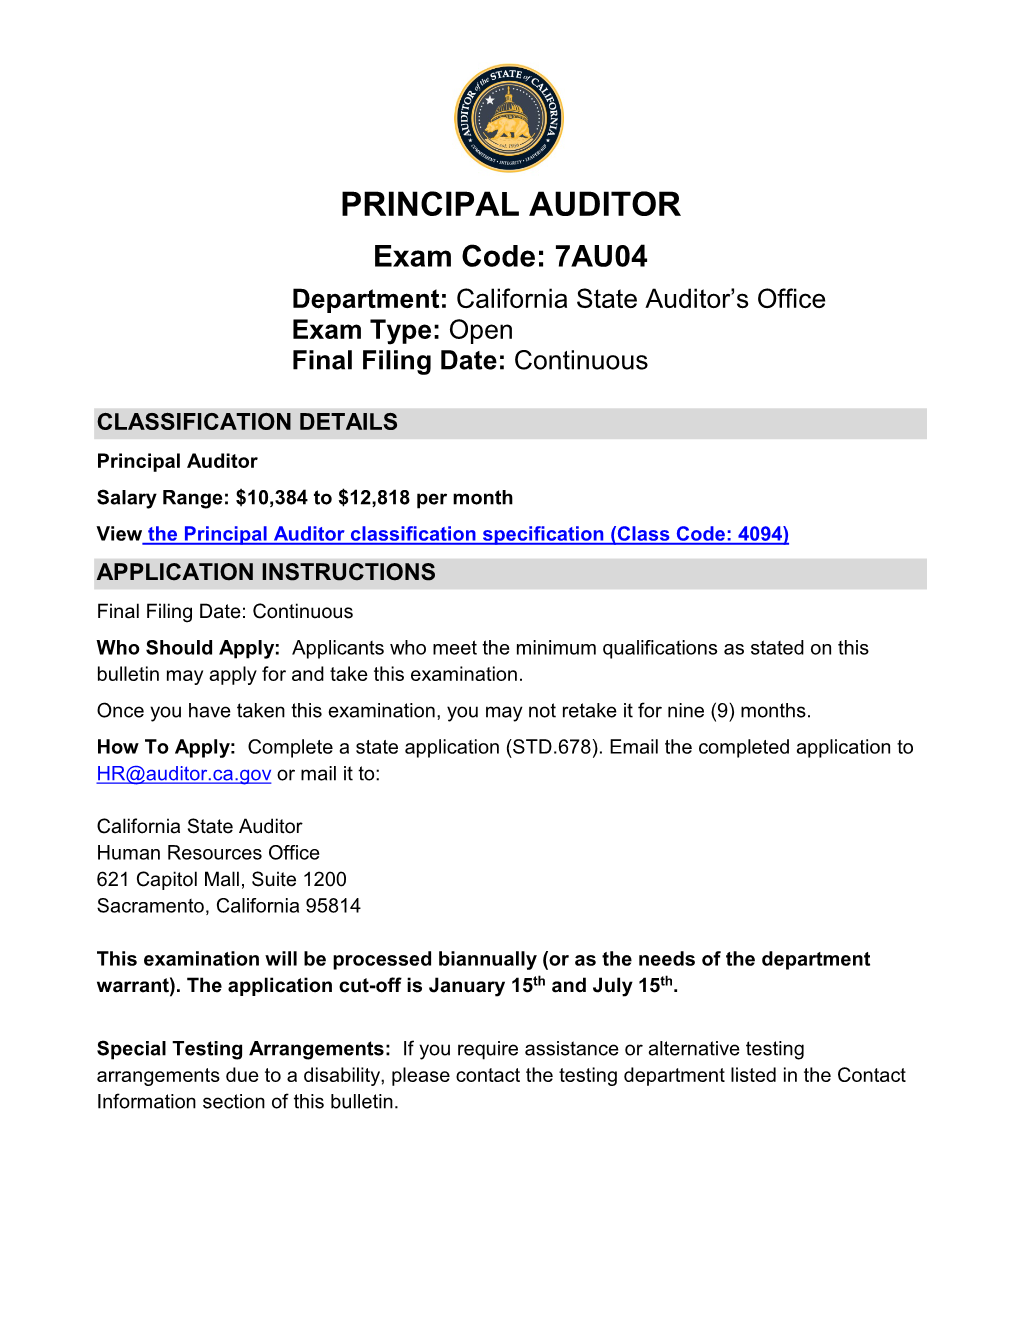 PRINCIPAL AUDITOR Exam Code: 7AU04 Department: California State Auditor’S Office Exam Type: Open Final Filing Date: Continuous